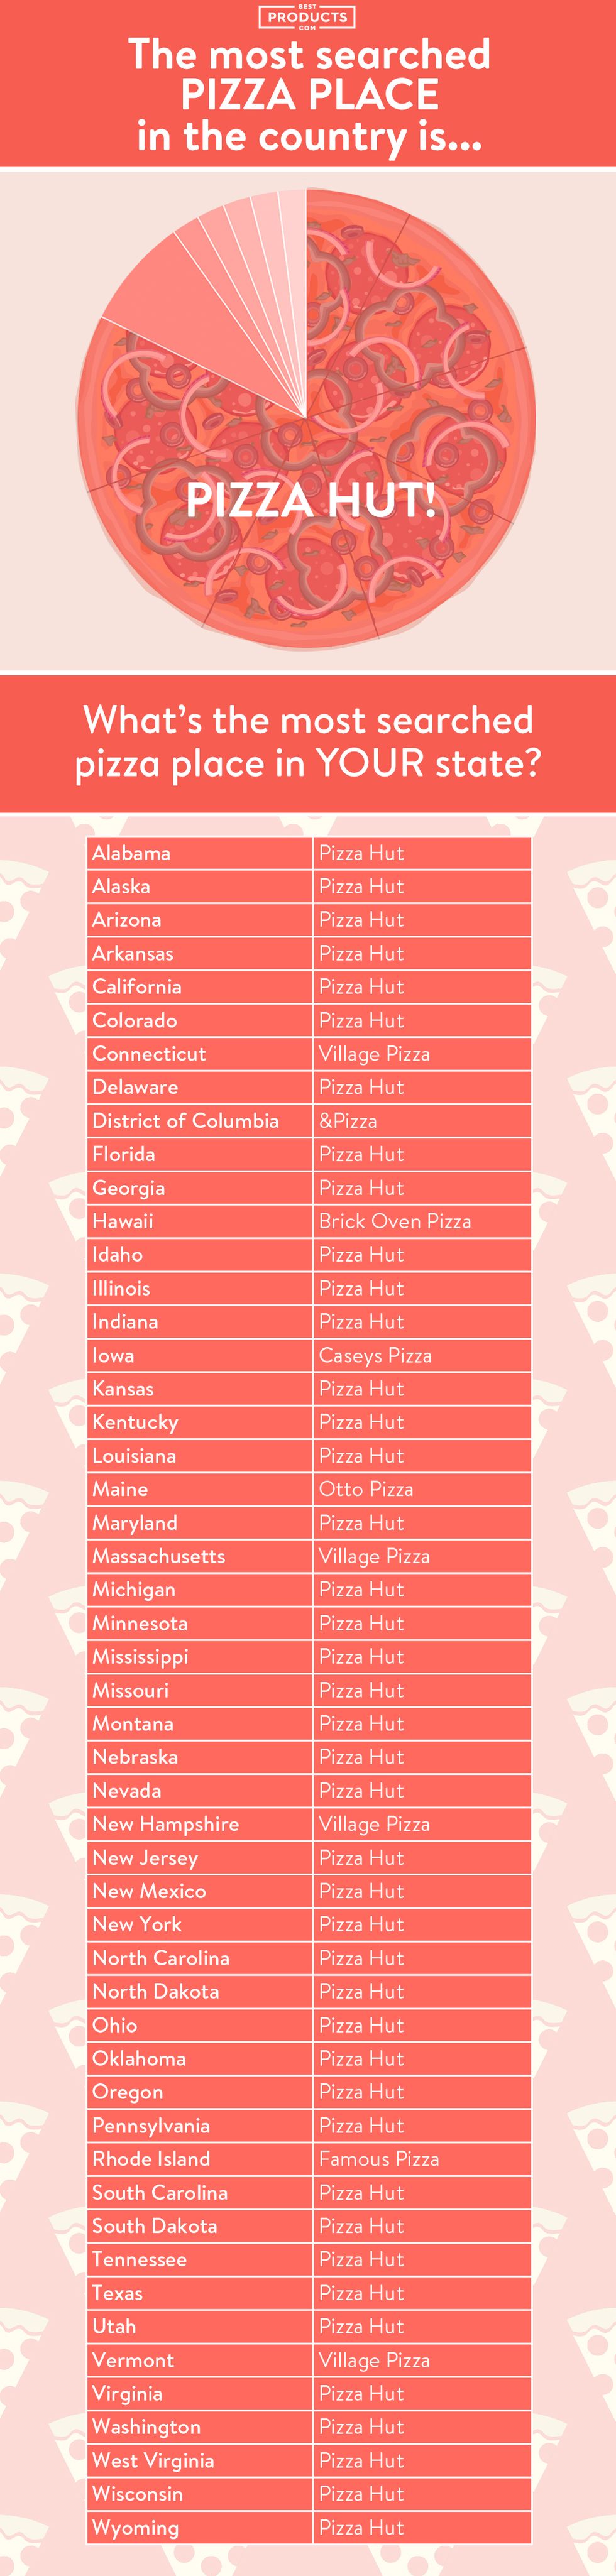 most searched pizza place in the US